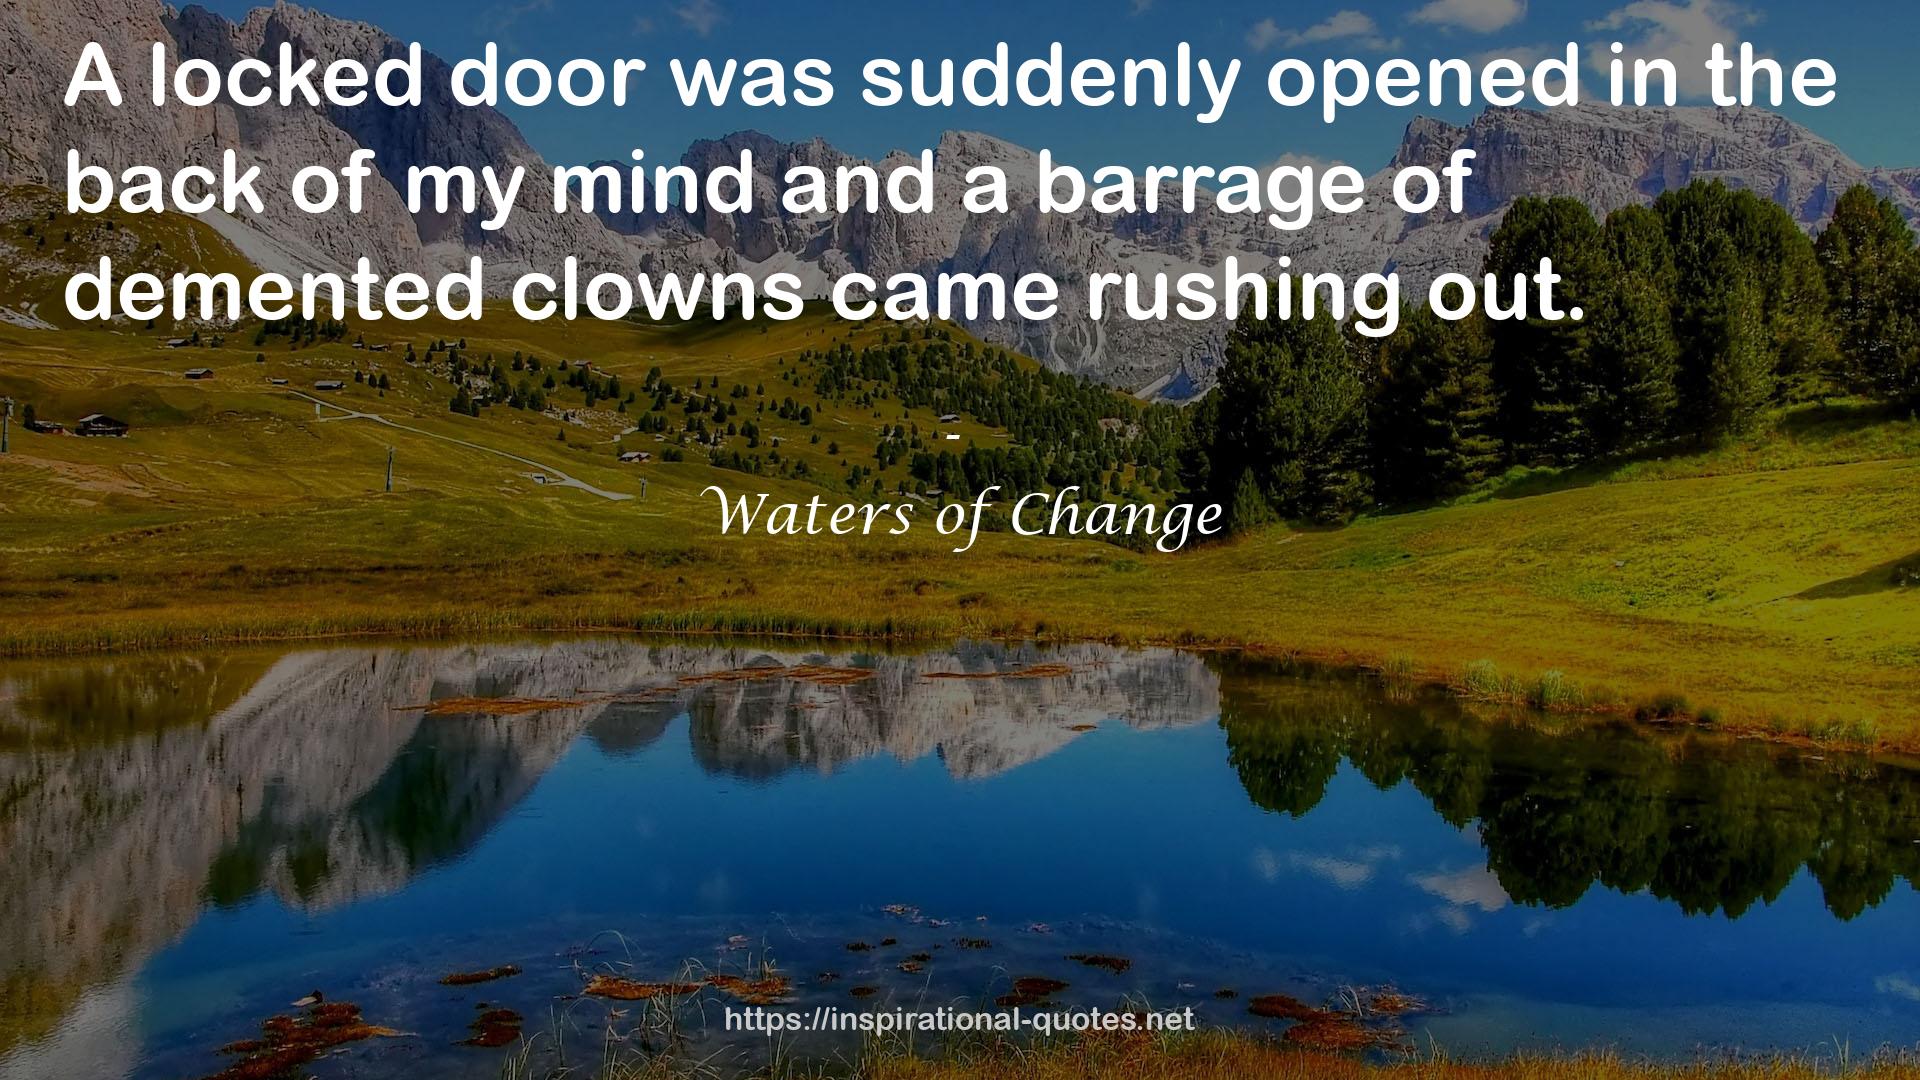 Waters of Change QUOTES